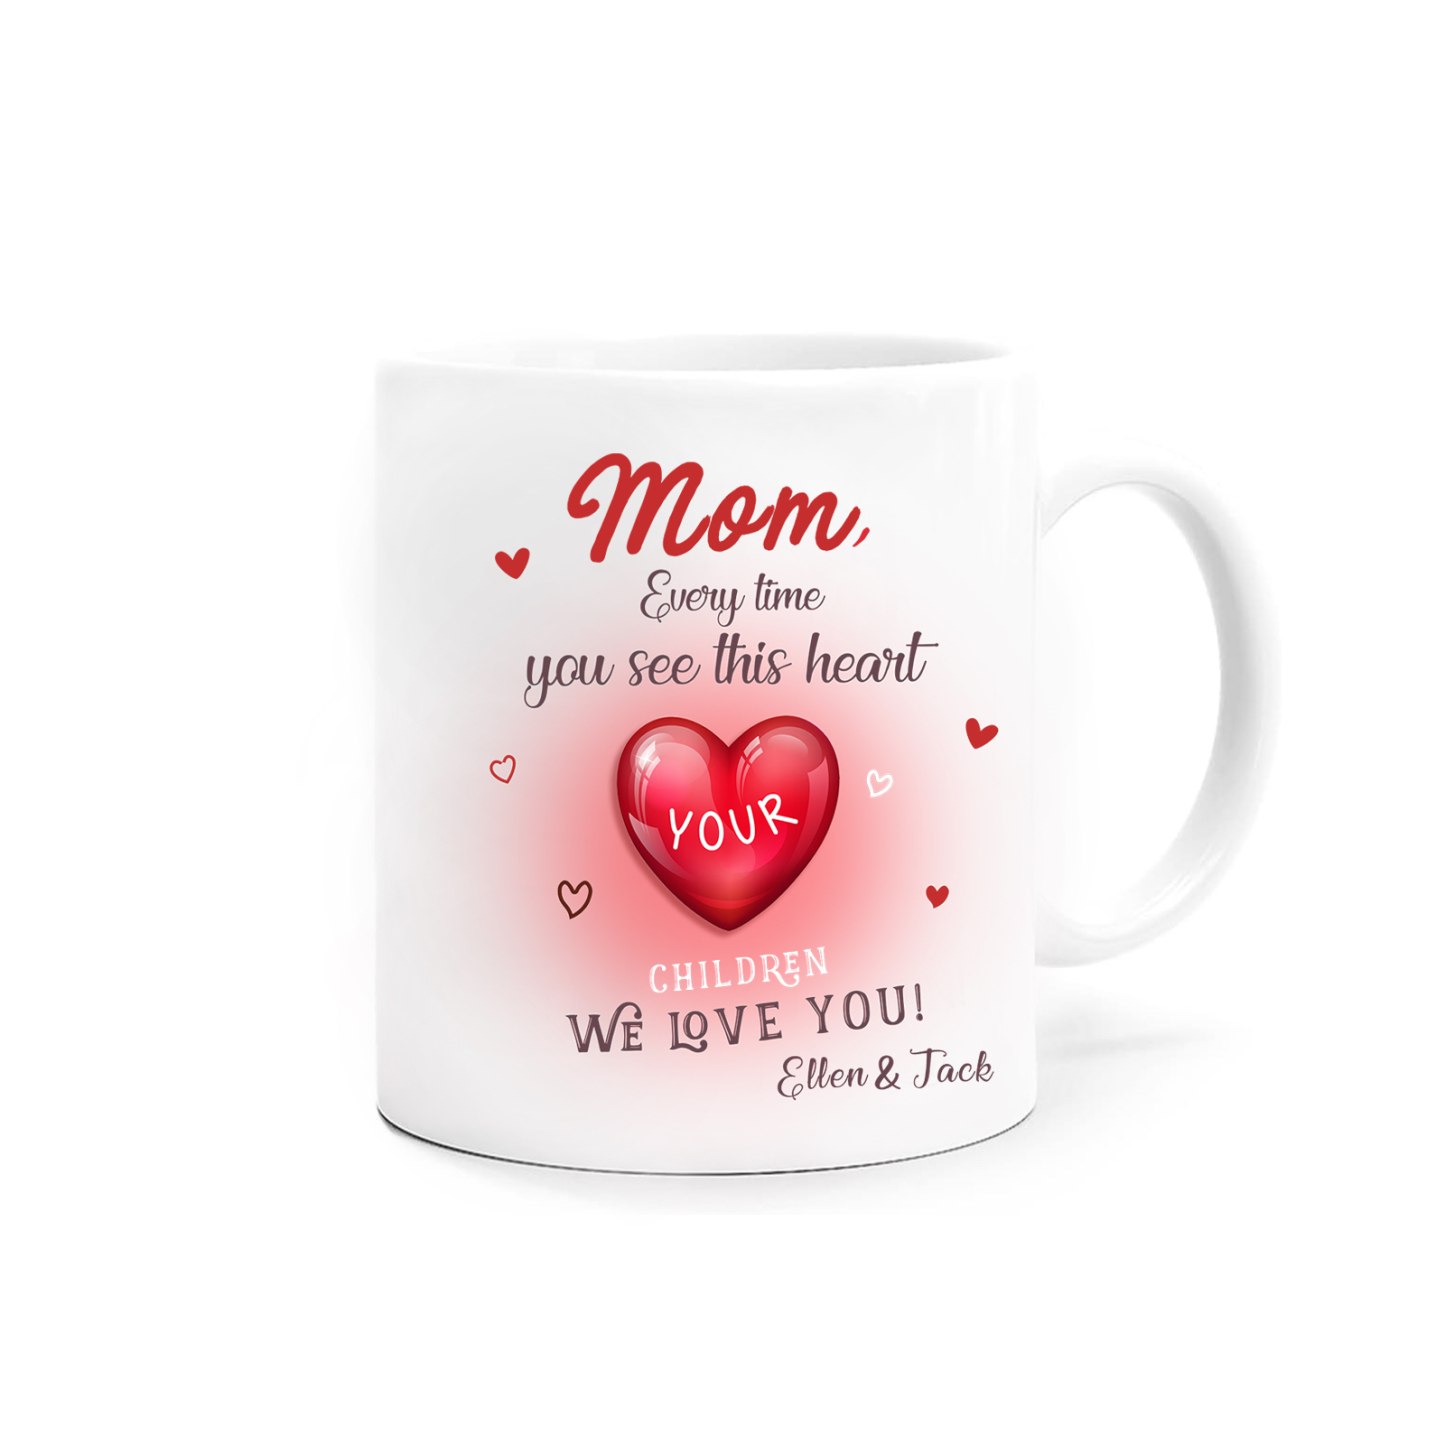 Personalized Custom Text Ceramic Cup with Exquisite Copywriting and Lo